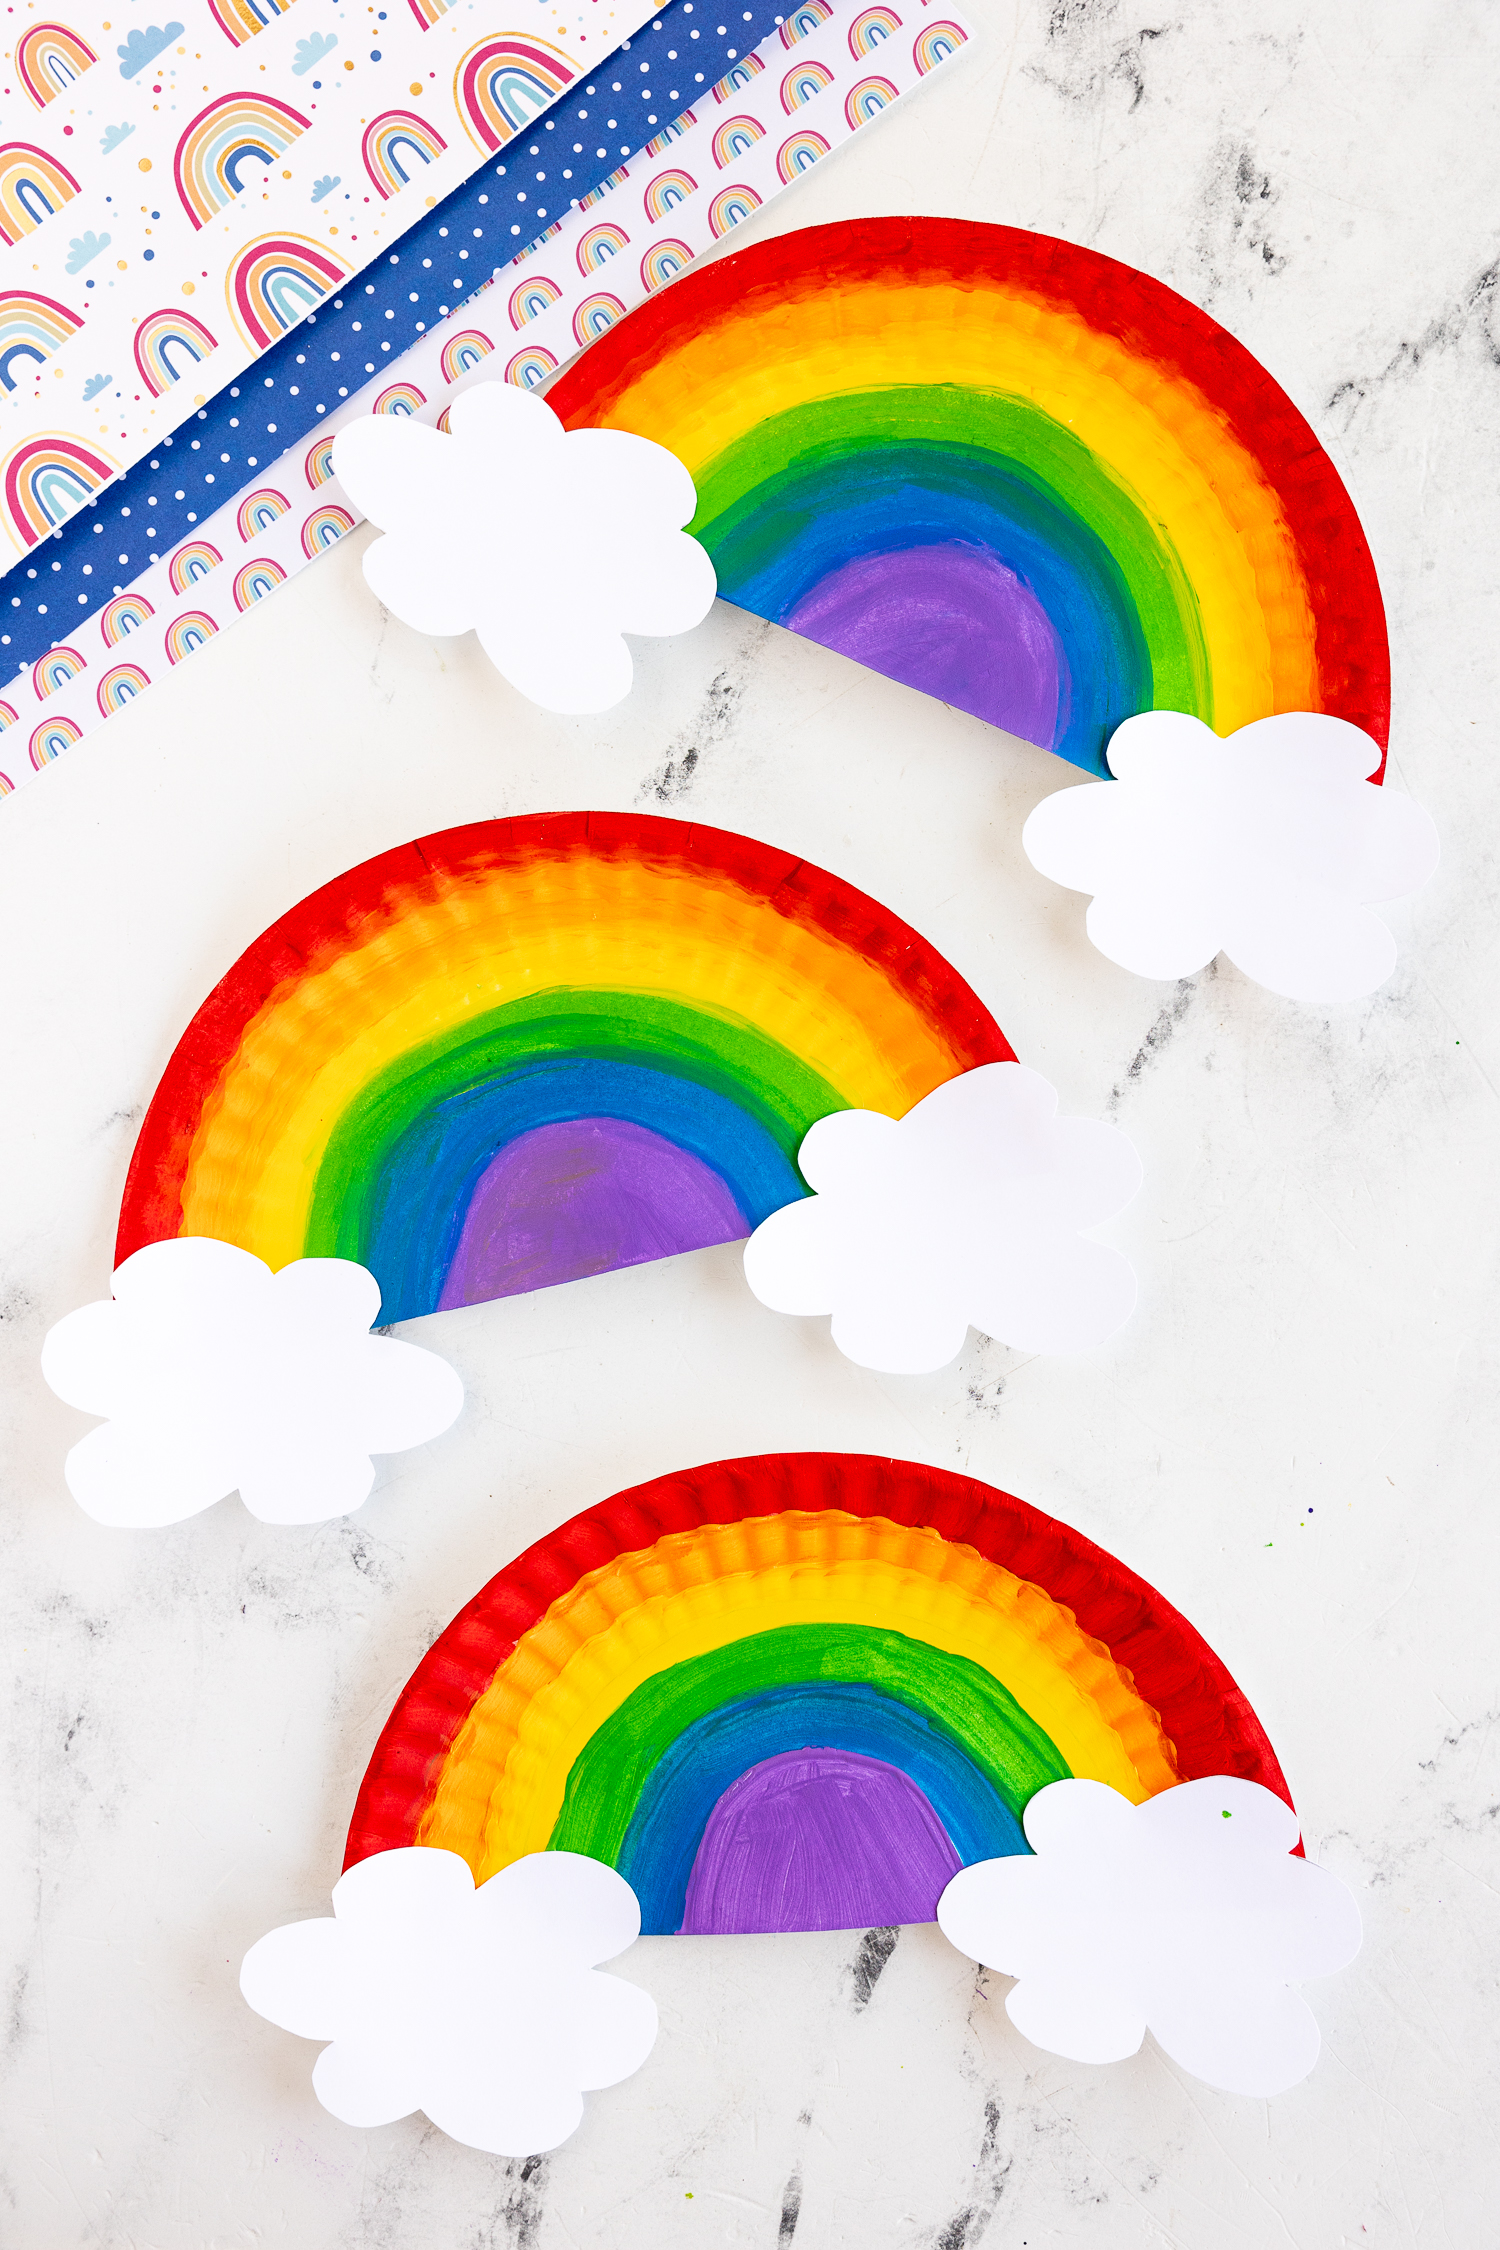 three painted paper plates in rainbow colors with paper clouds attached